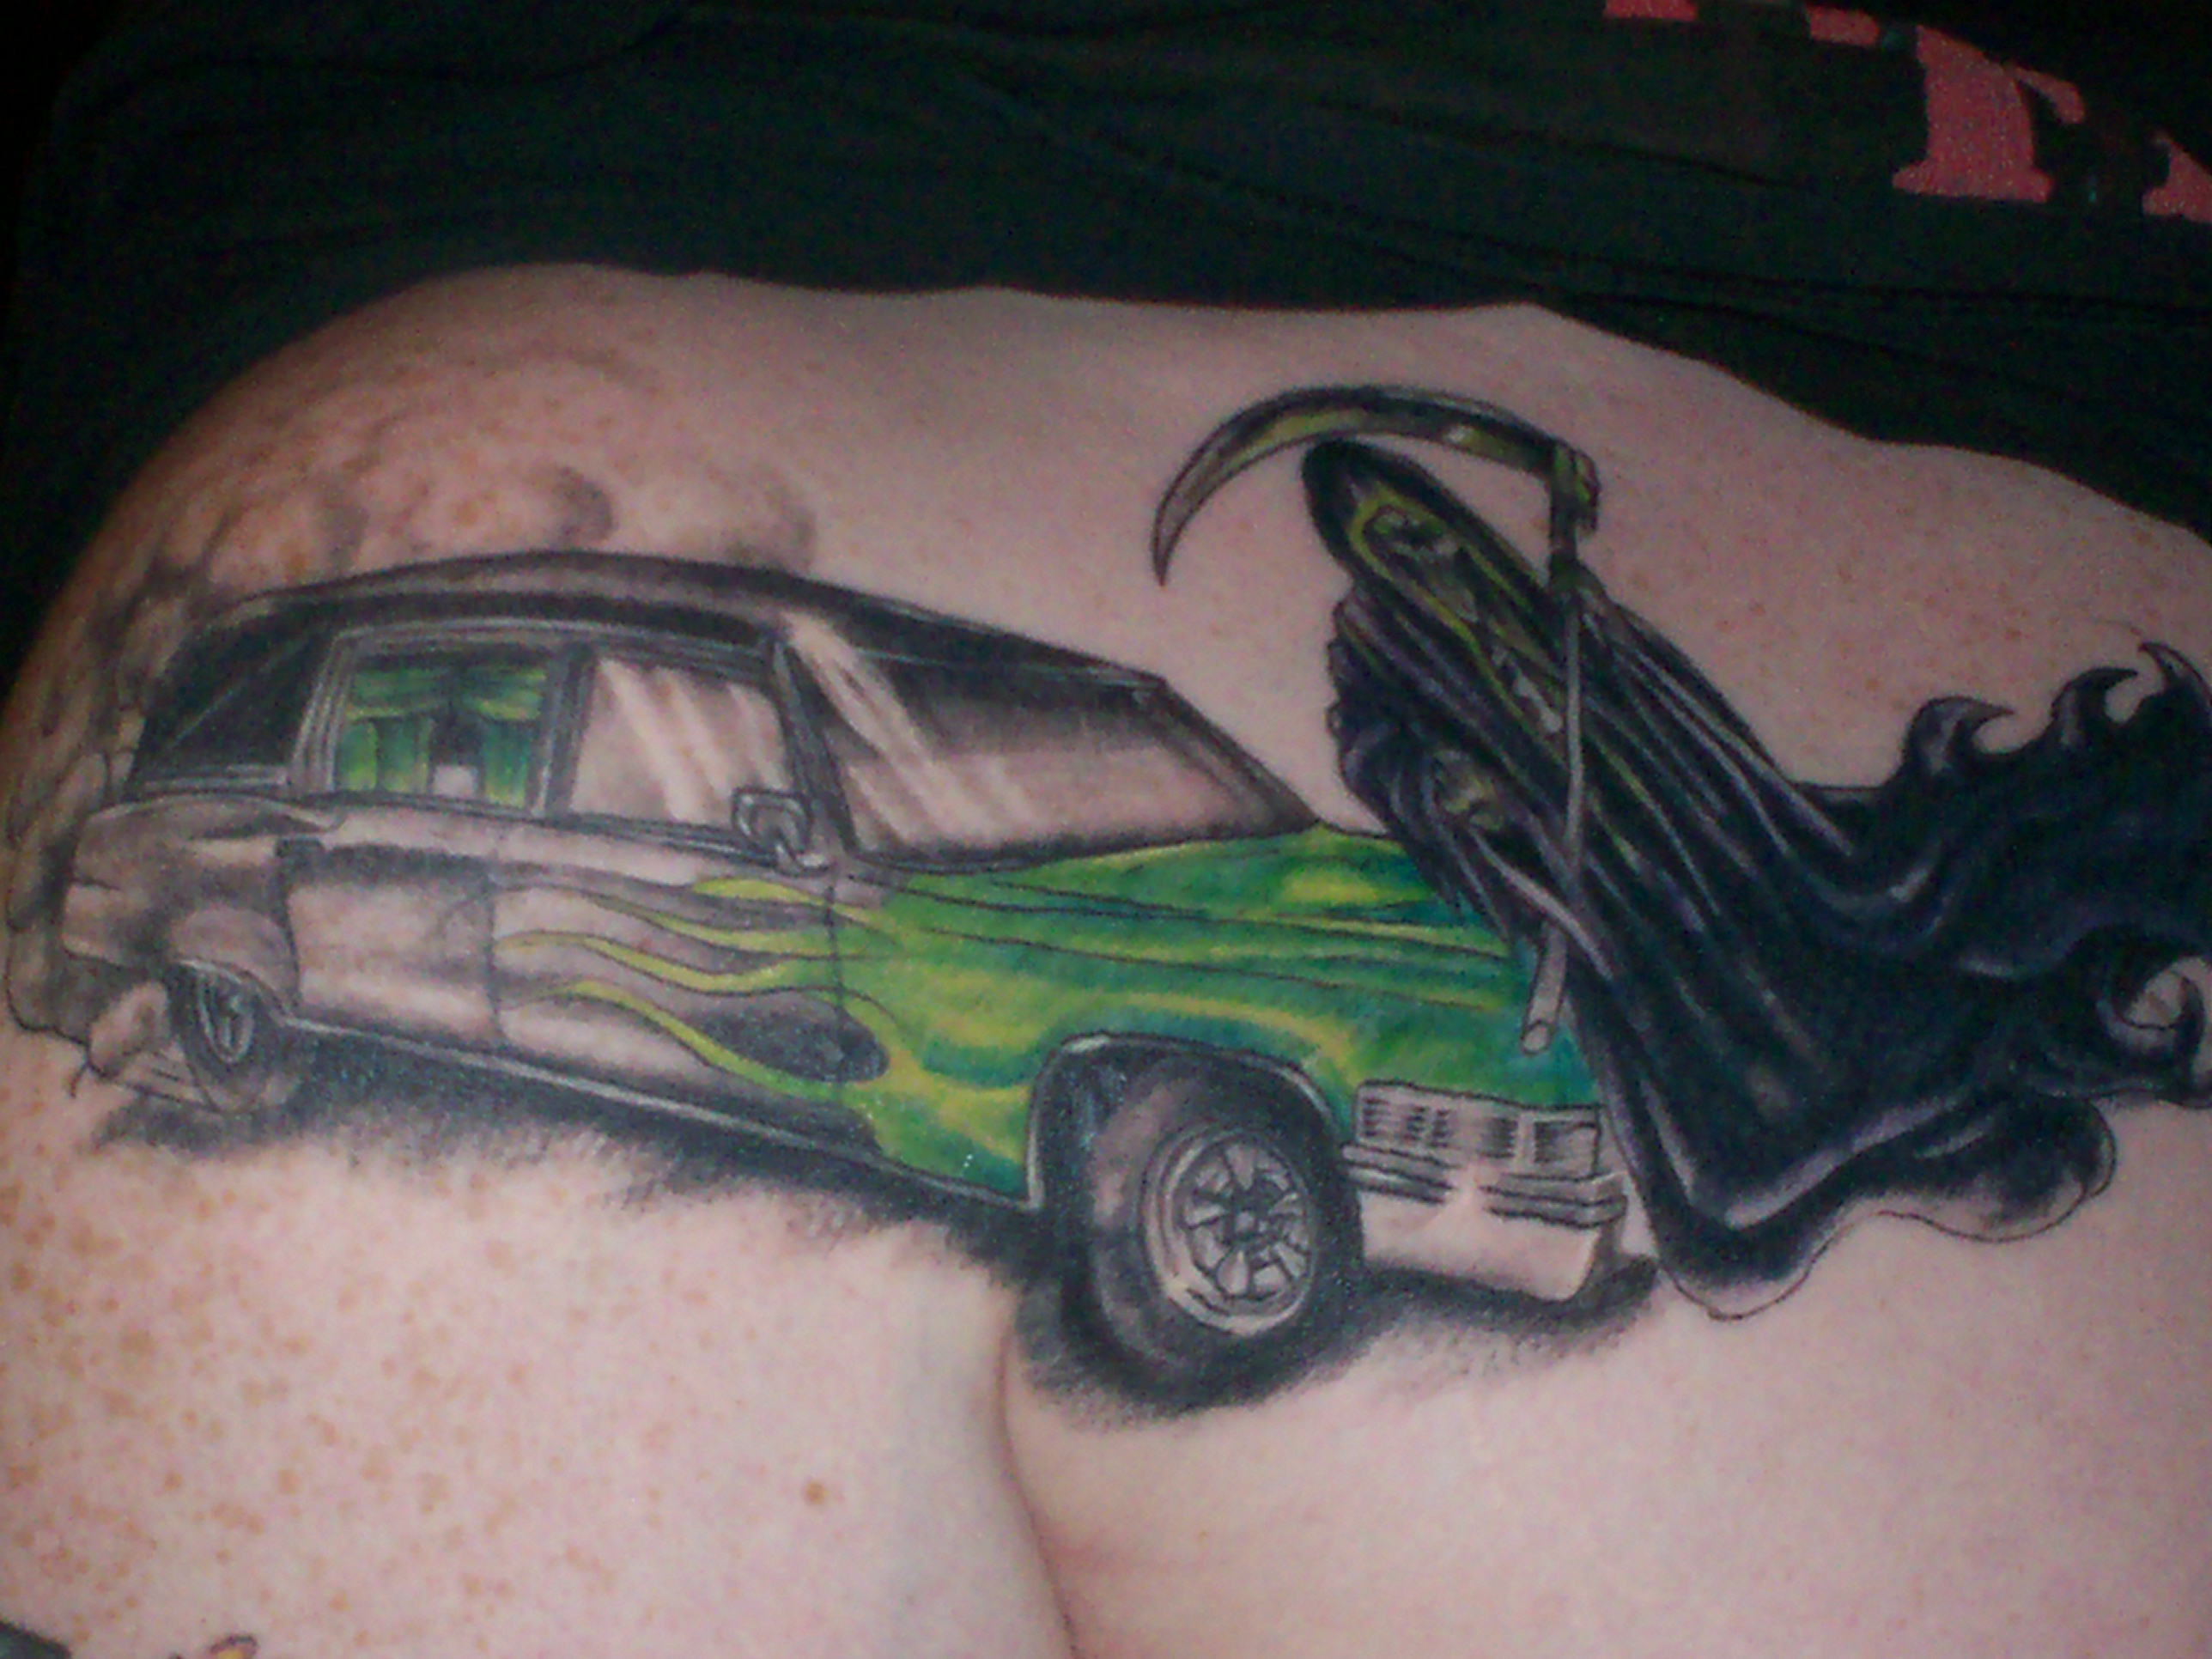 grim reaper flipping you off in front of a black hearse with green flames this tatt. was a cover up job. one of my favorite tattoos. its on my right shoulder